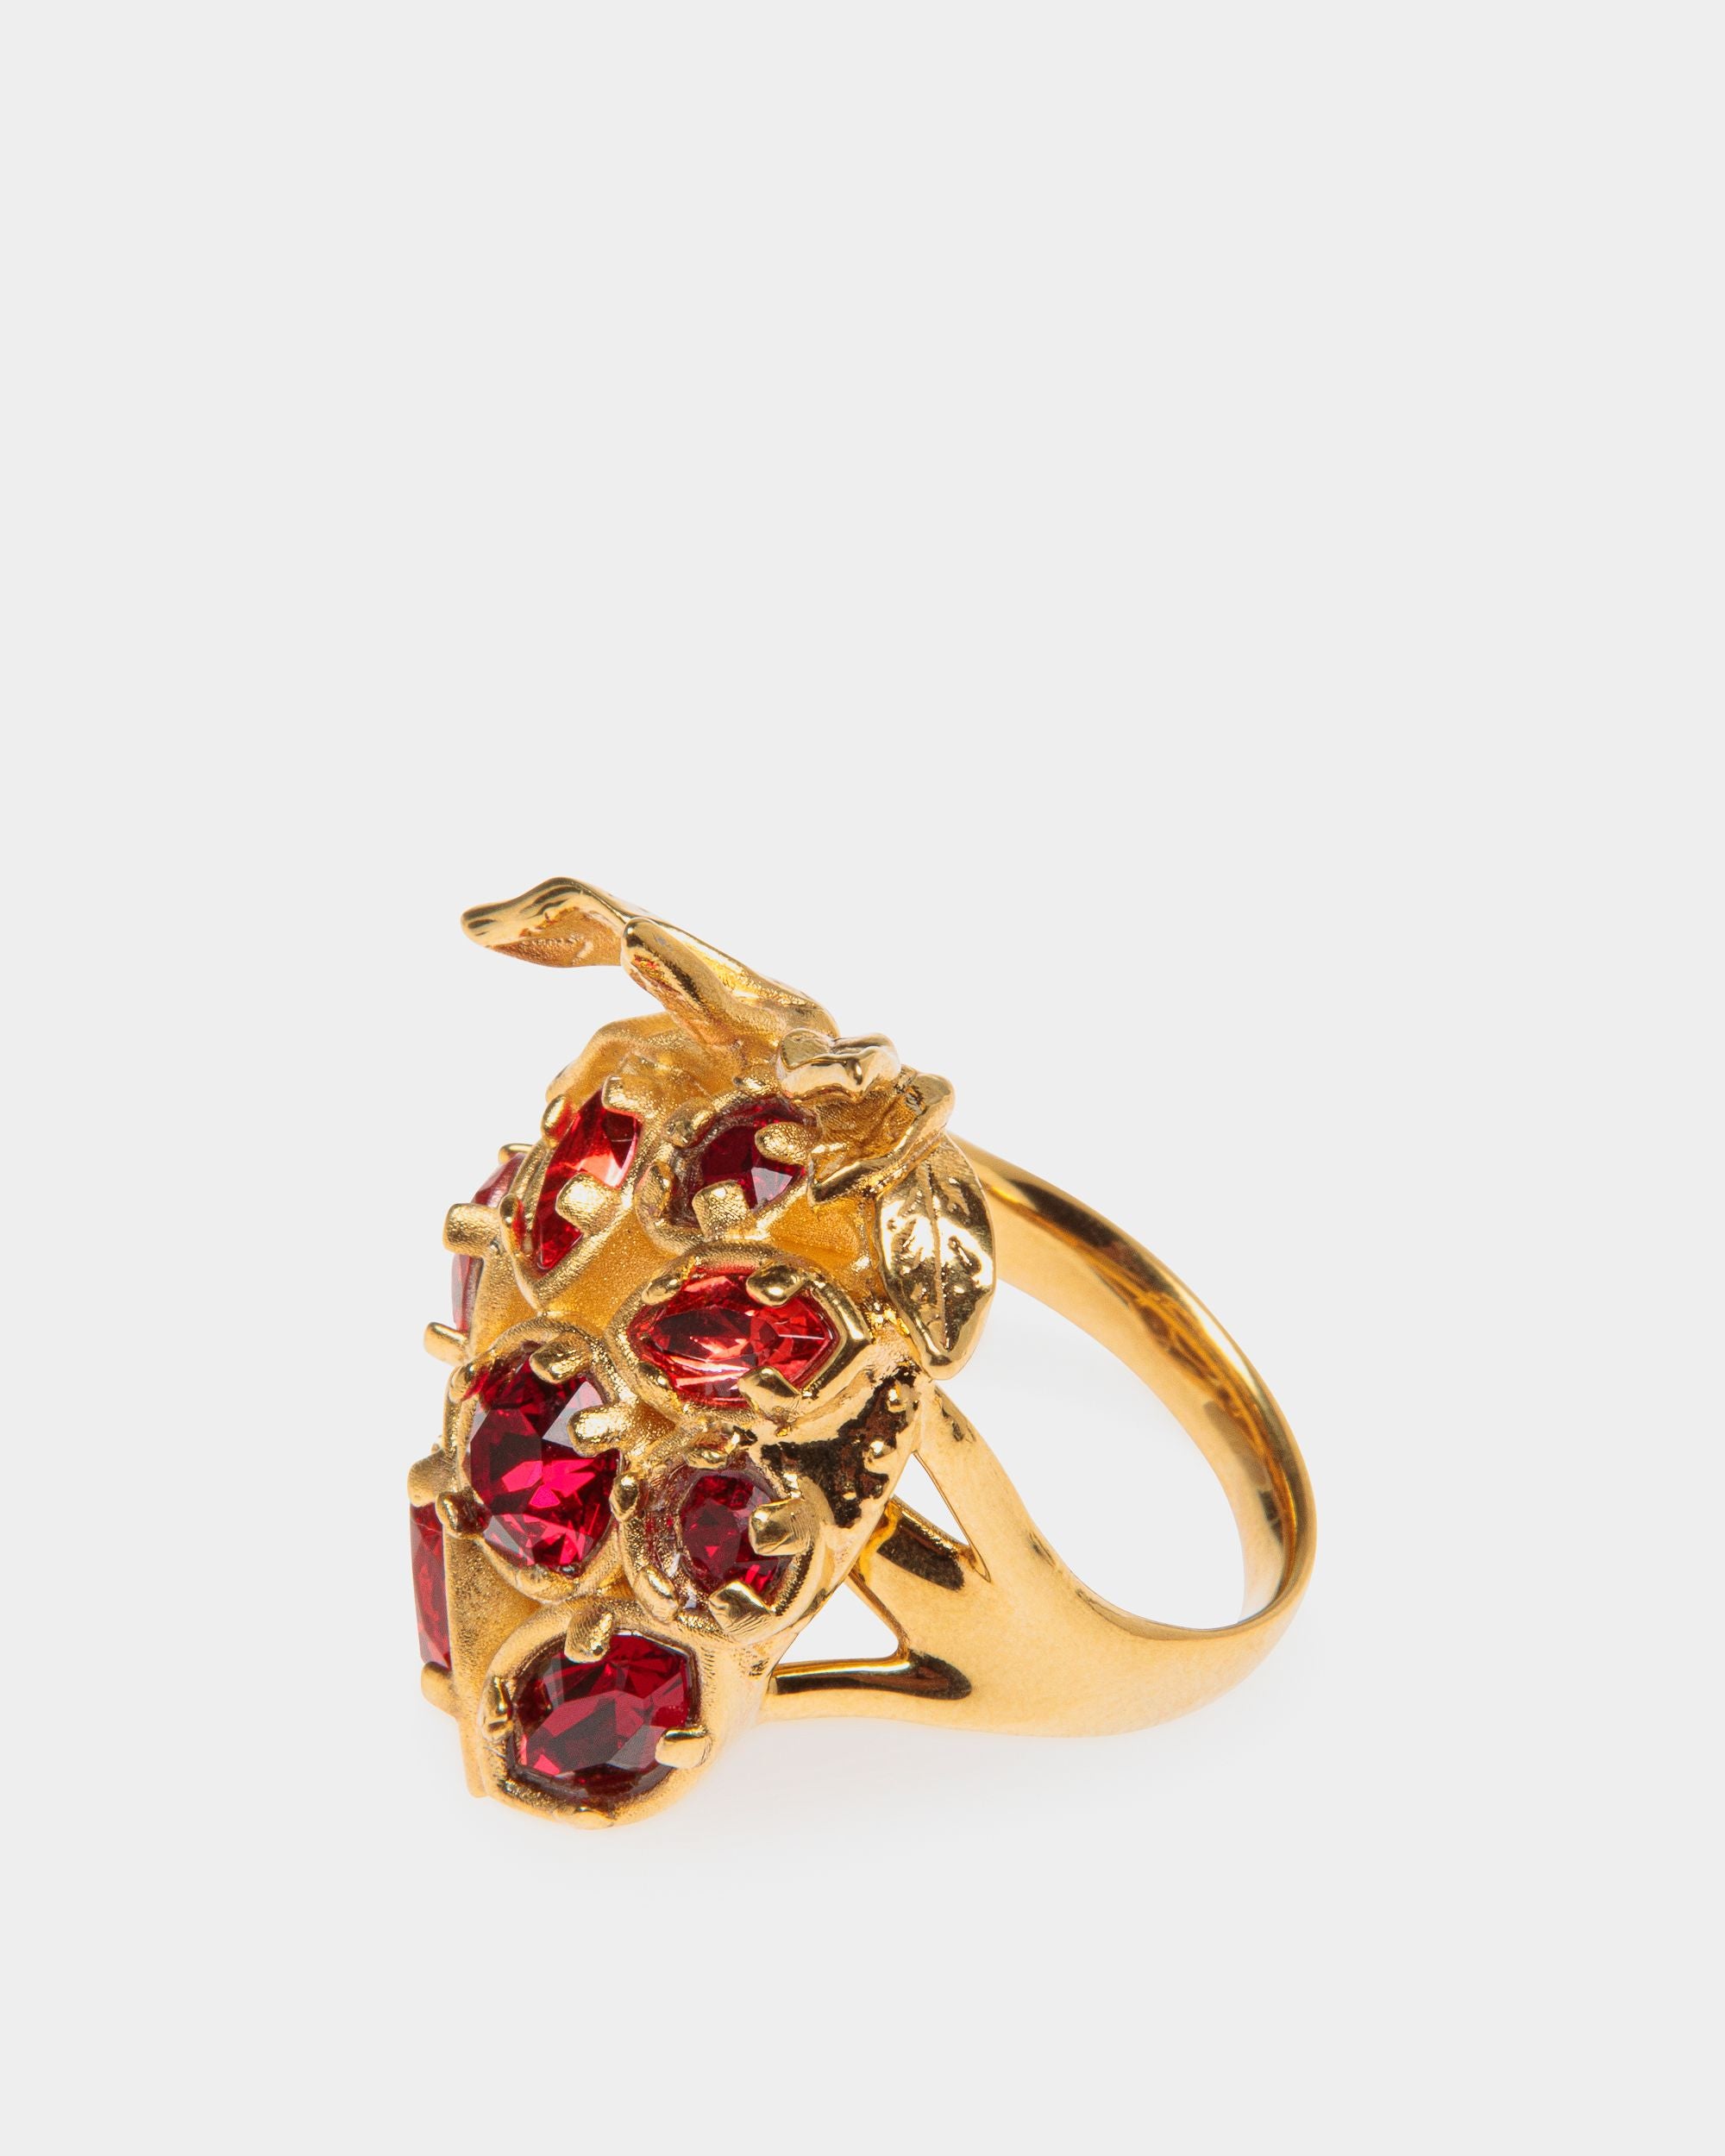 Deco | Women's Ring in Gold Eco Brass and Crystals | Bally | Still Life Front